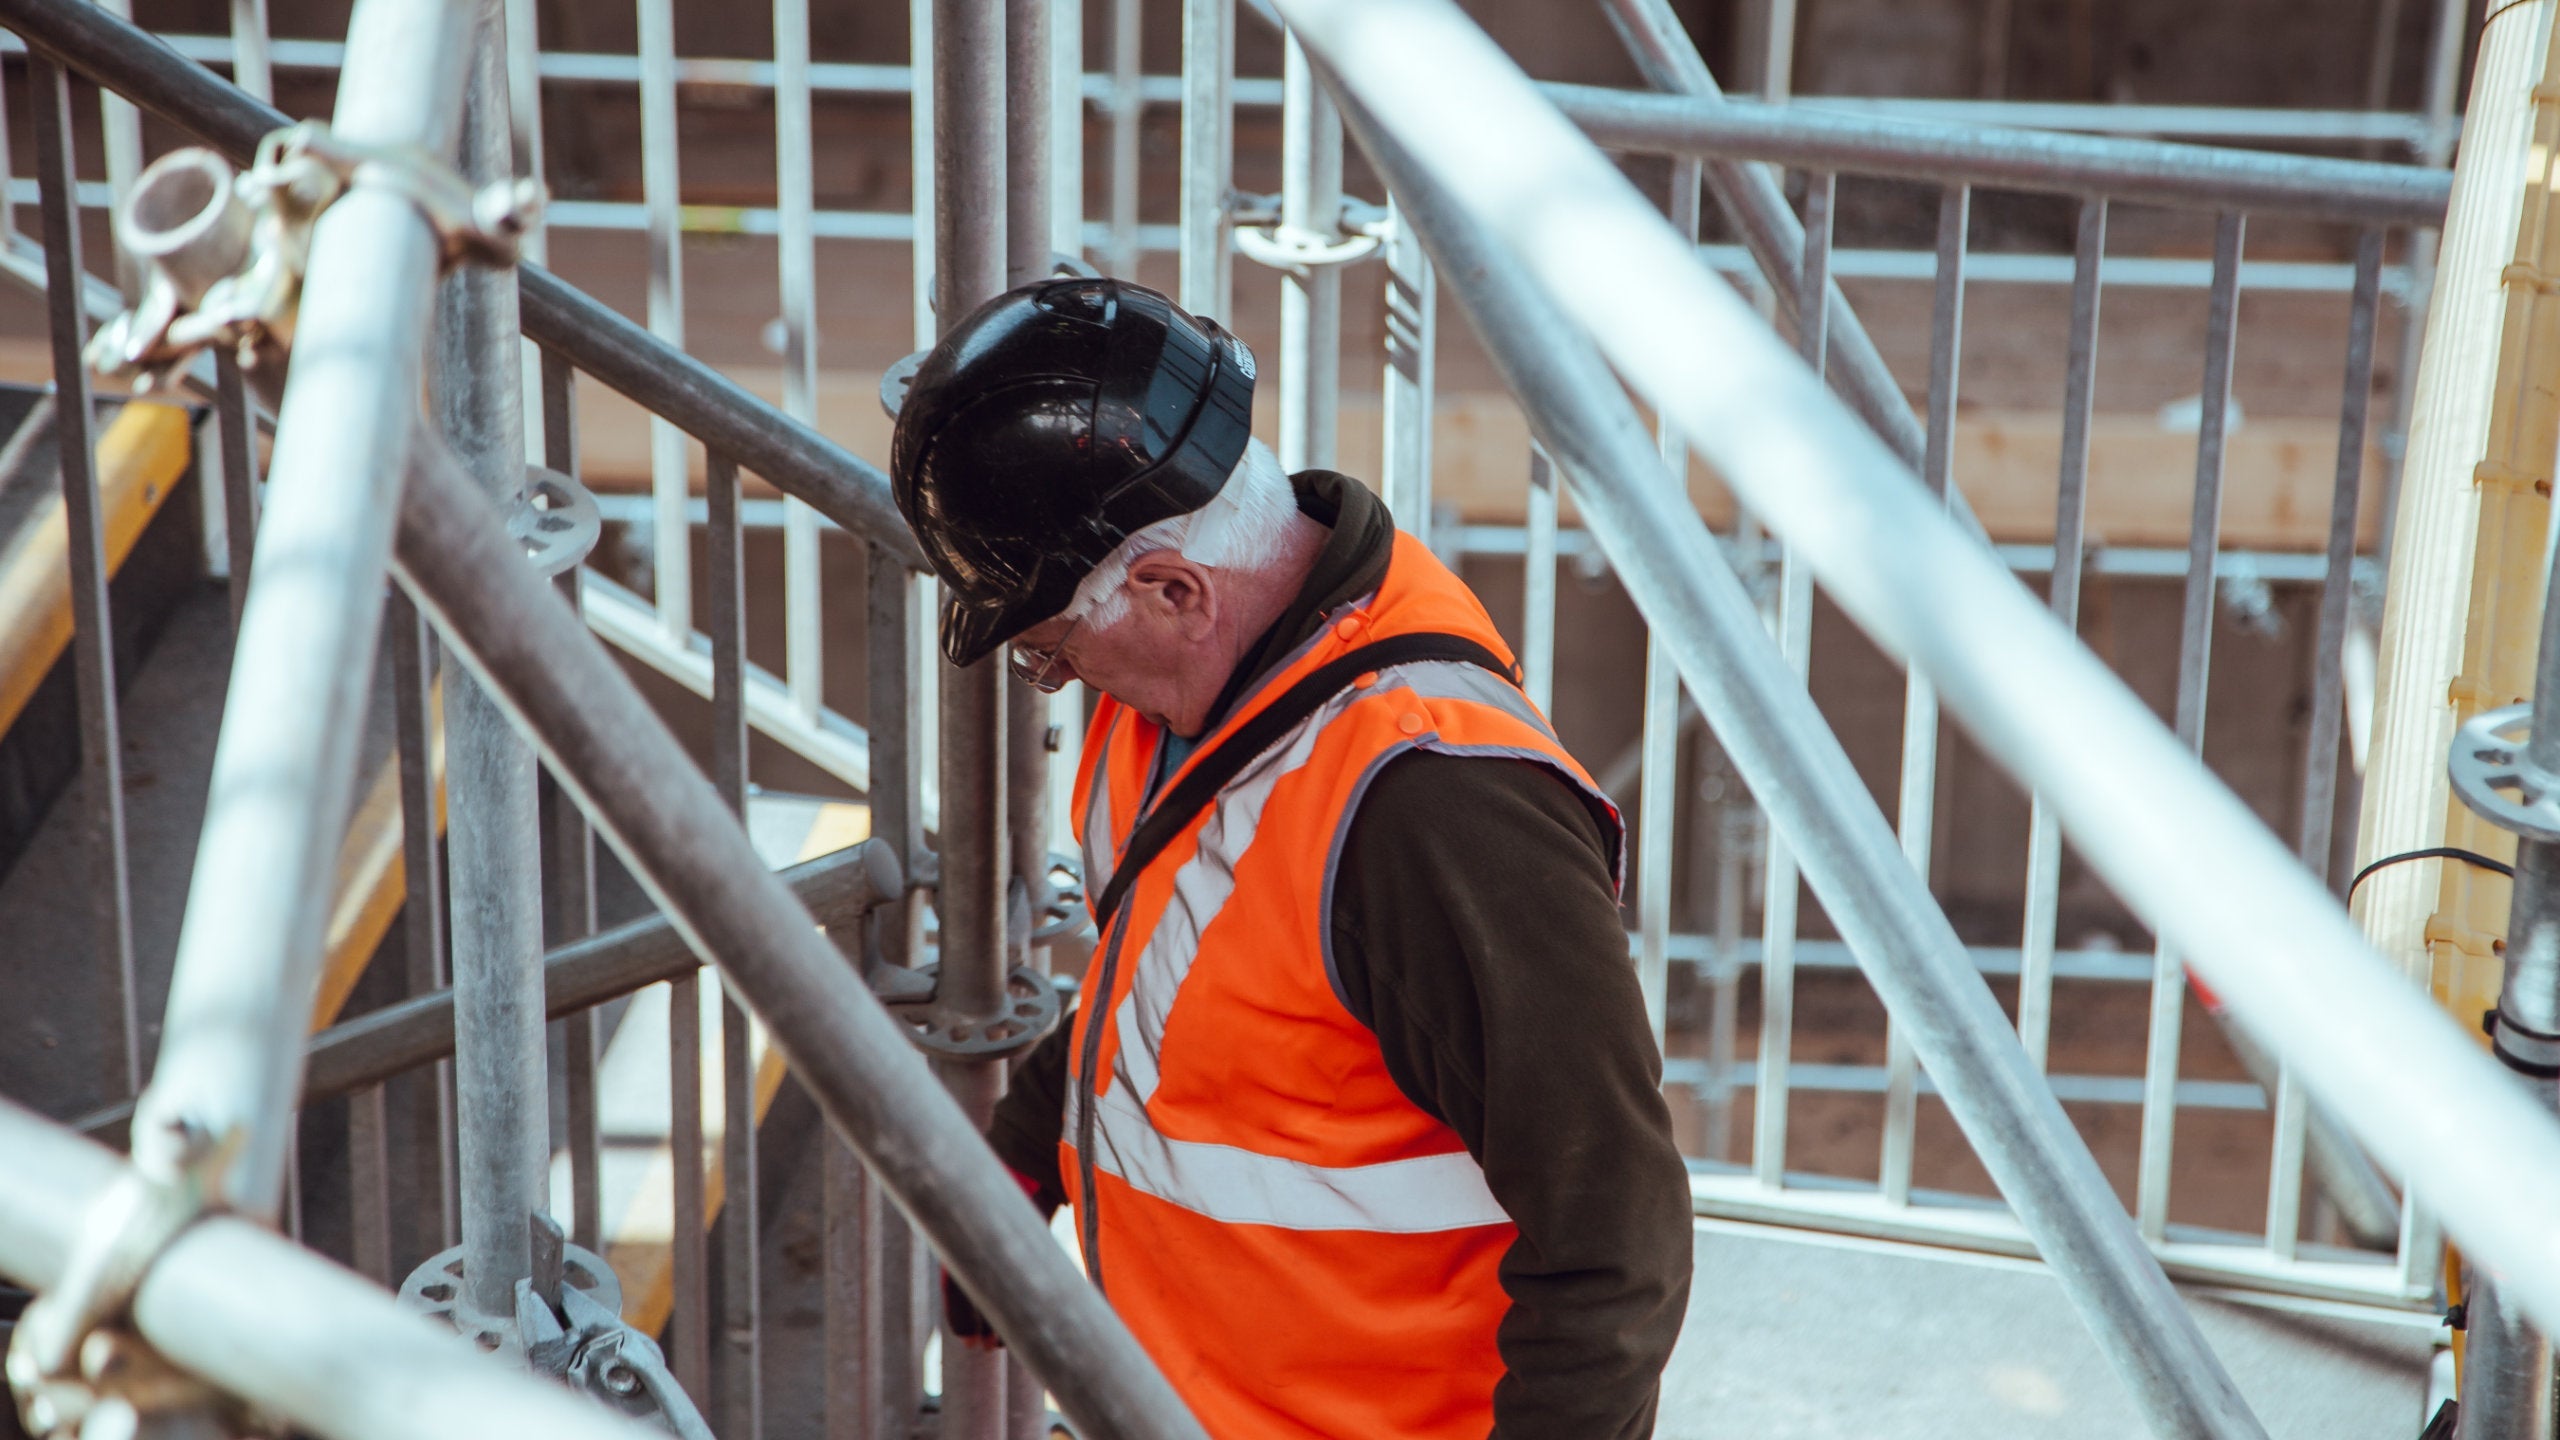 An older man wearing a safety vest at a construction site